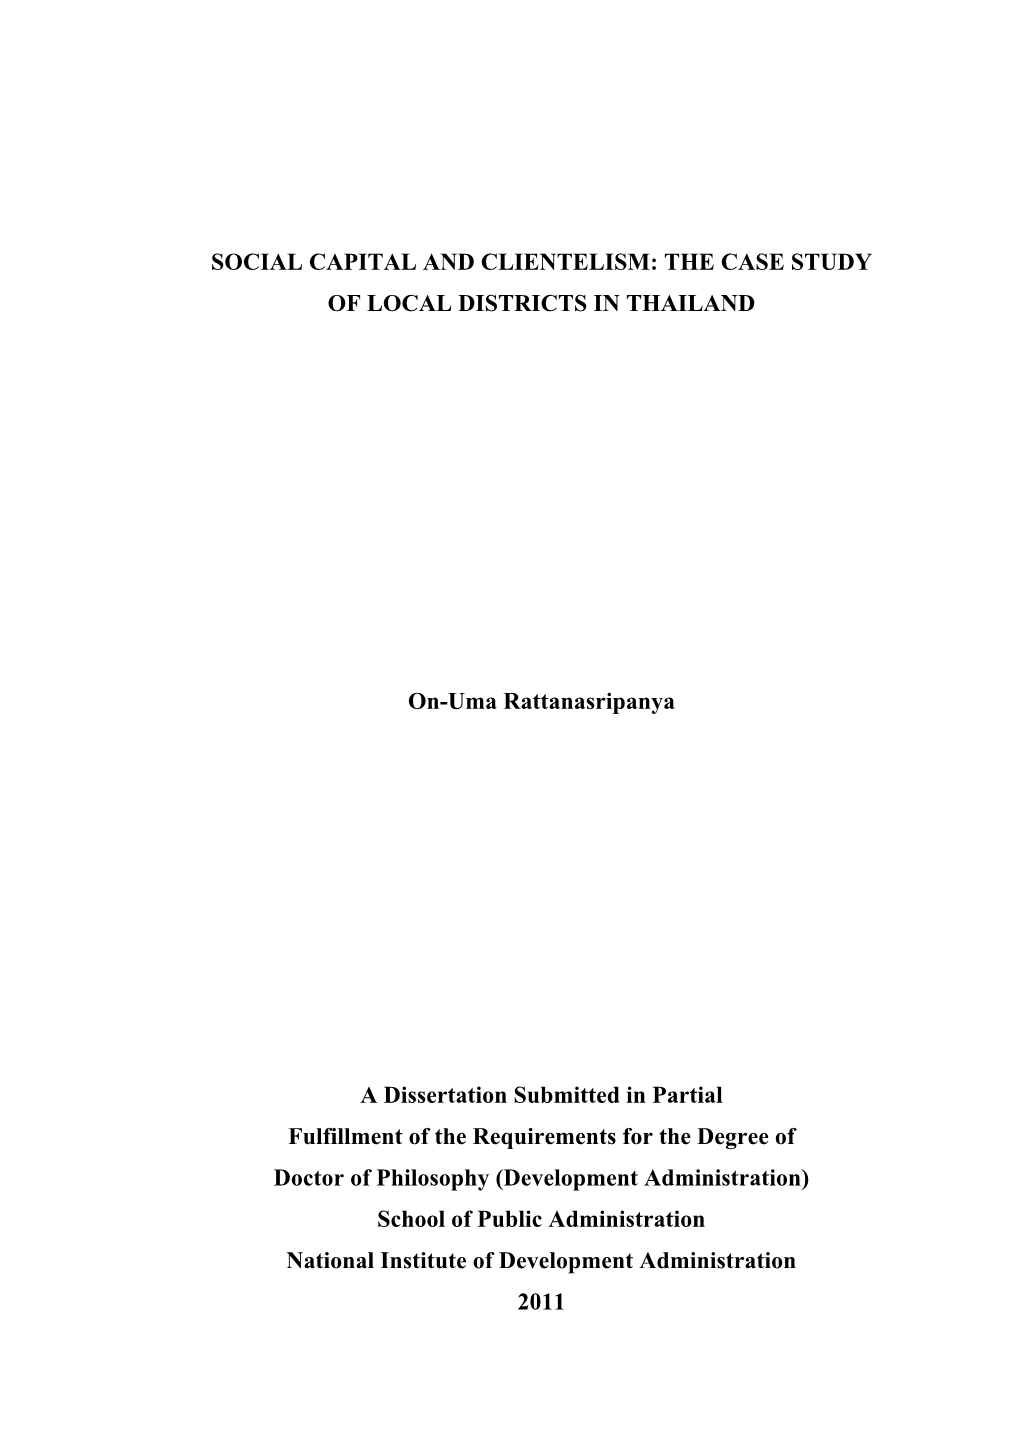 SOCIAL CAPITAL and CLIENTELISM: the CASE STUDY of LOCAL DISTRICTS in THAILAND On-Uma Rattanasripanya a Dissertation Submitted I